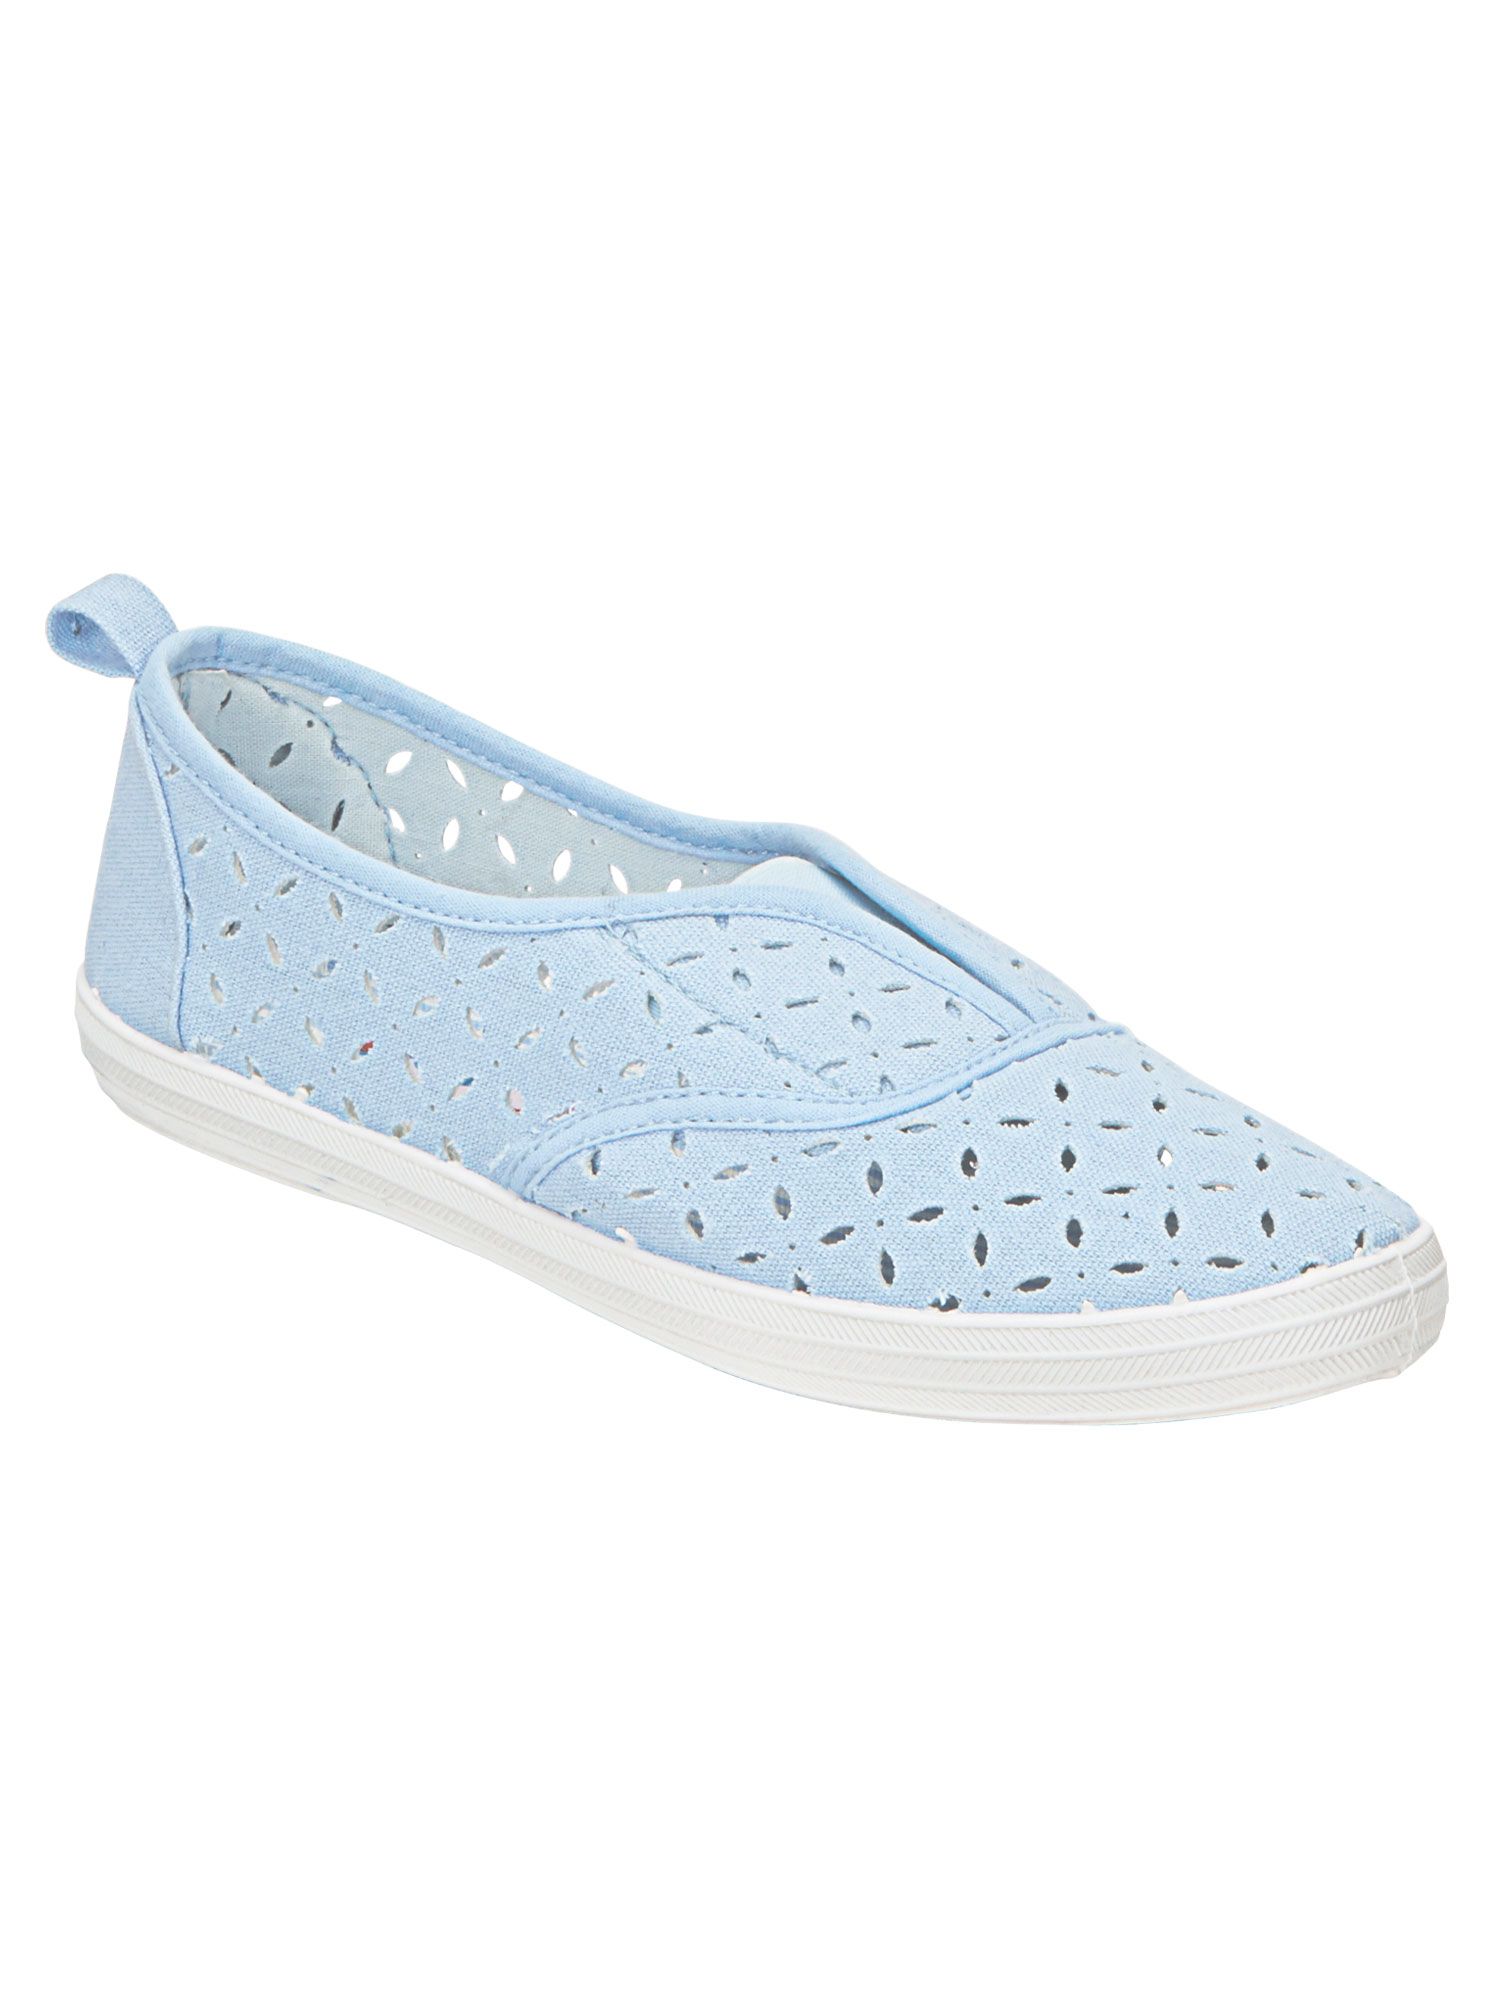 Floral White Canvas Slip On Shoes for Women